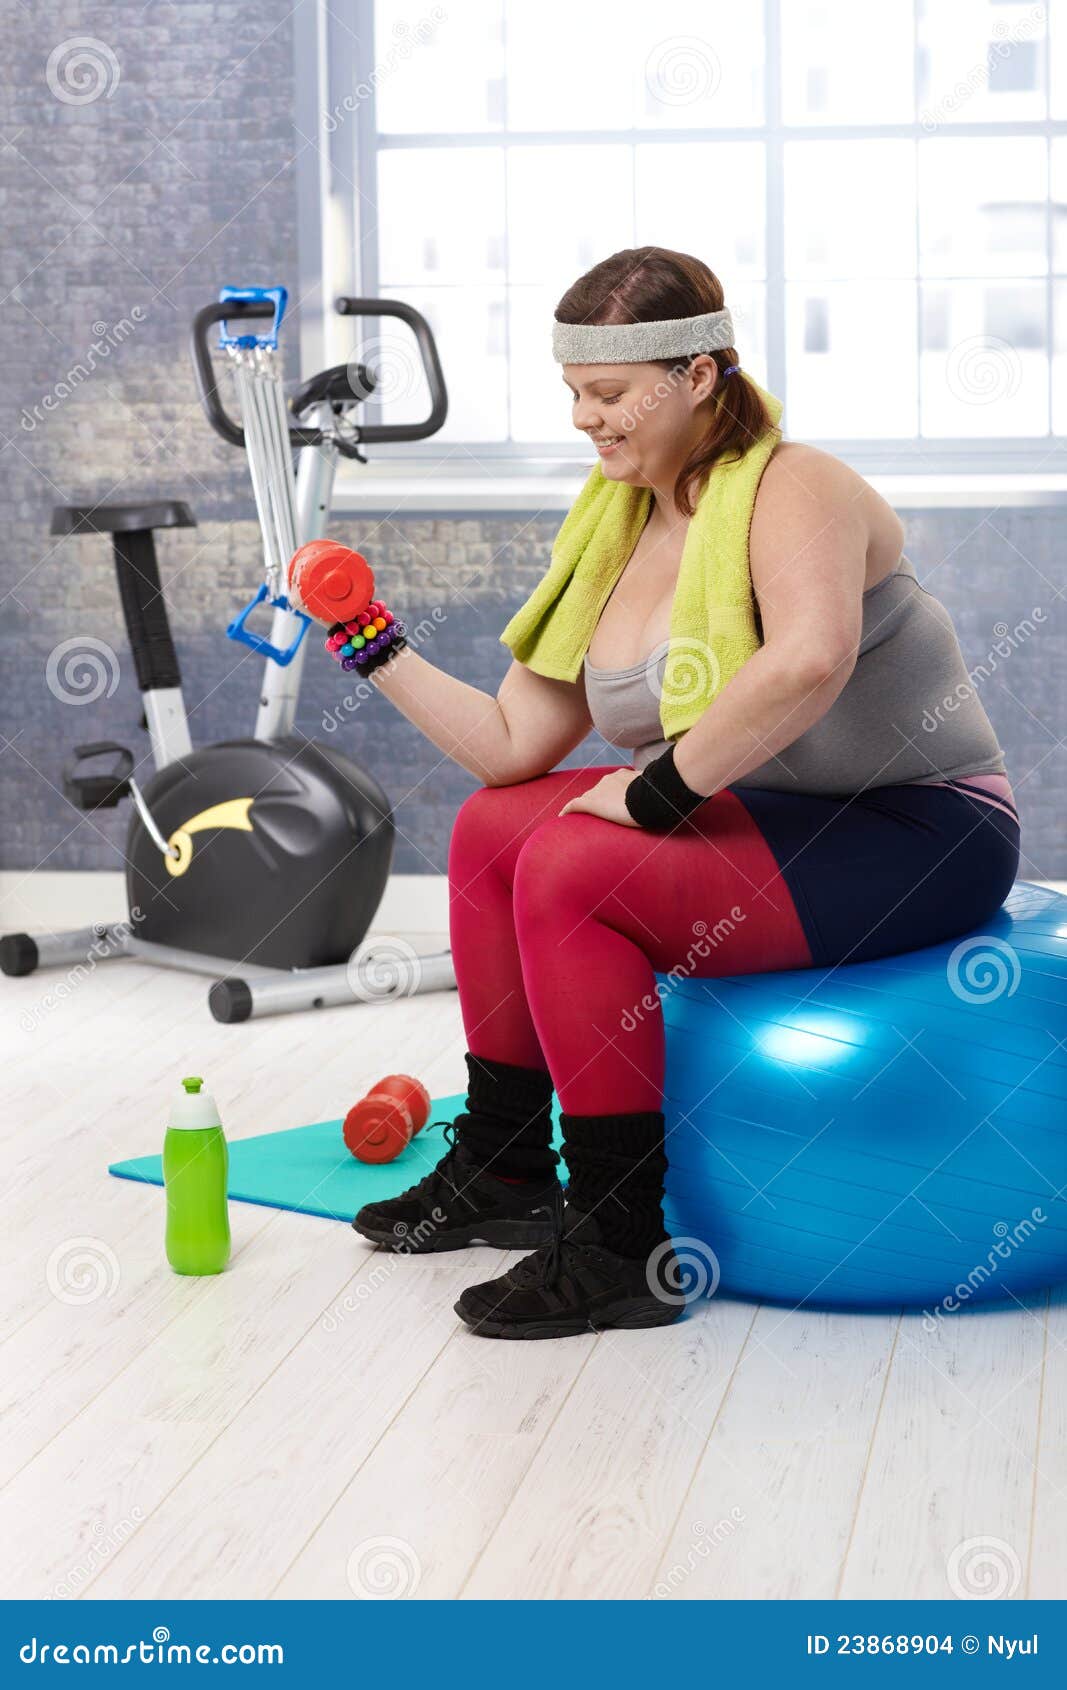 plump woman exercising with dumbbells